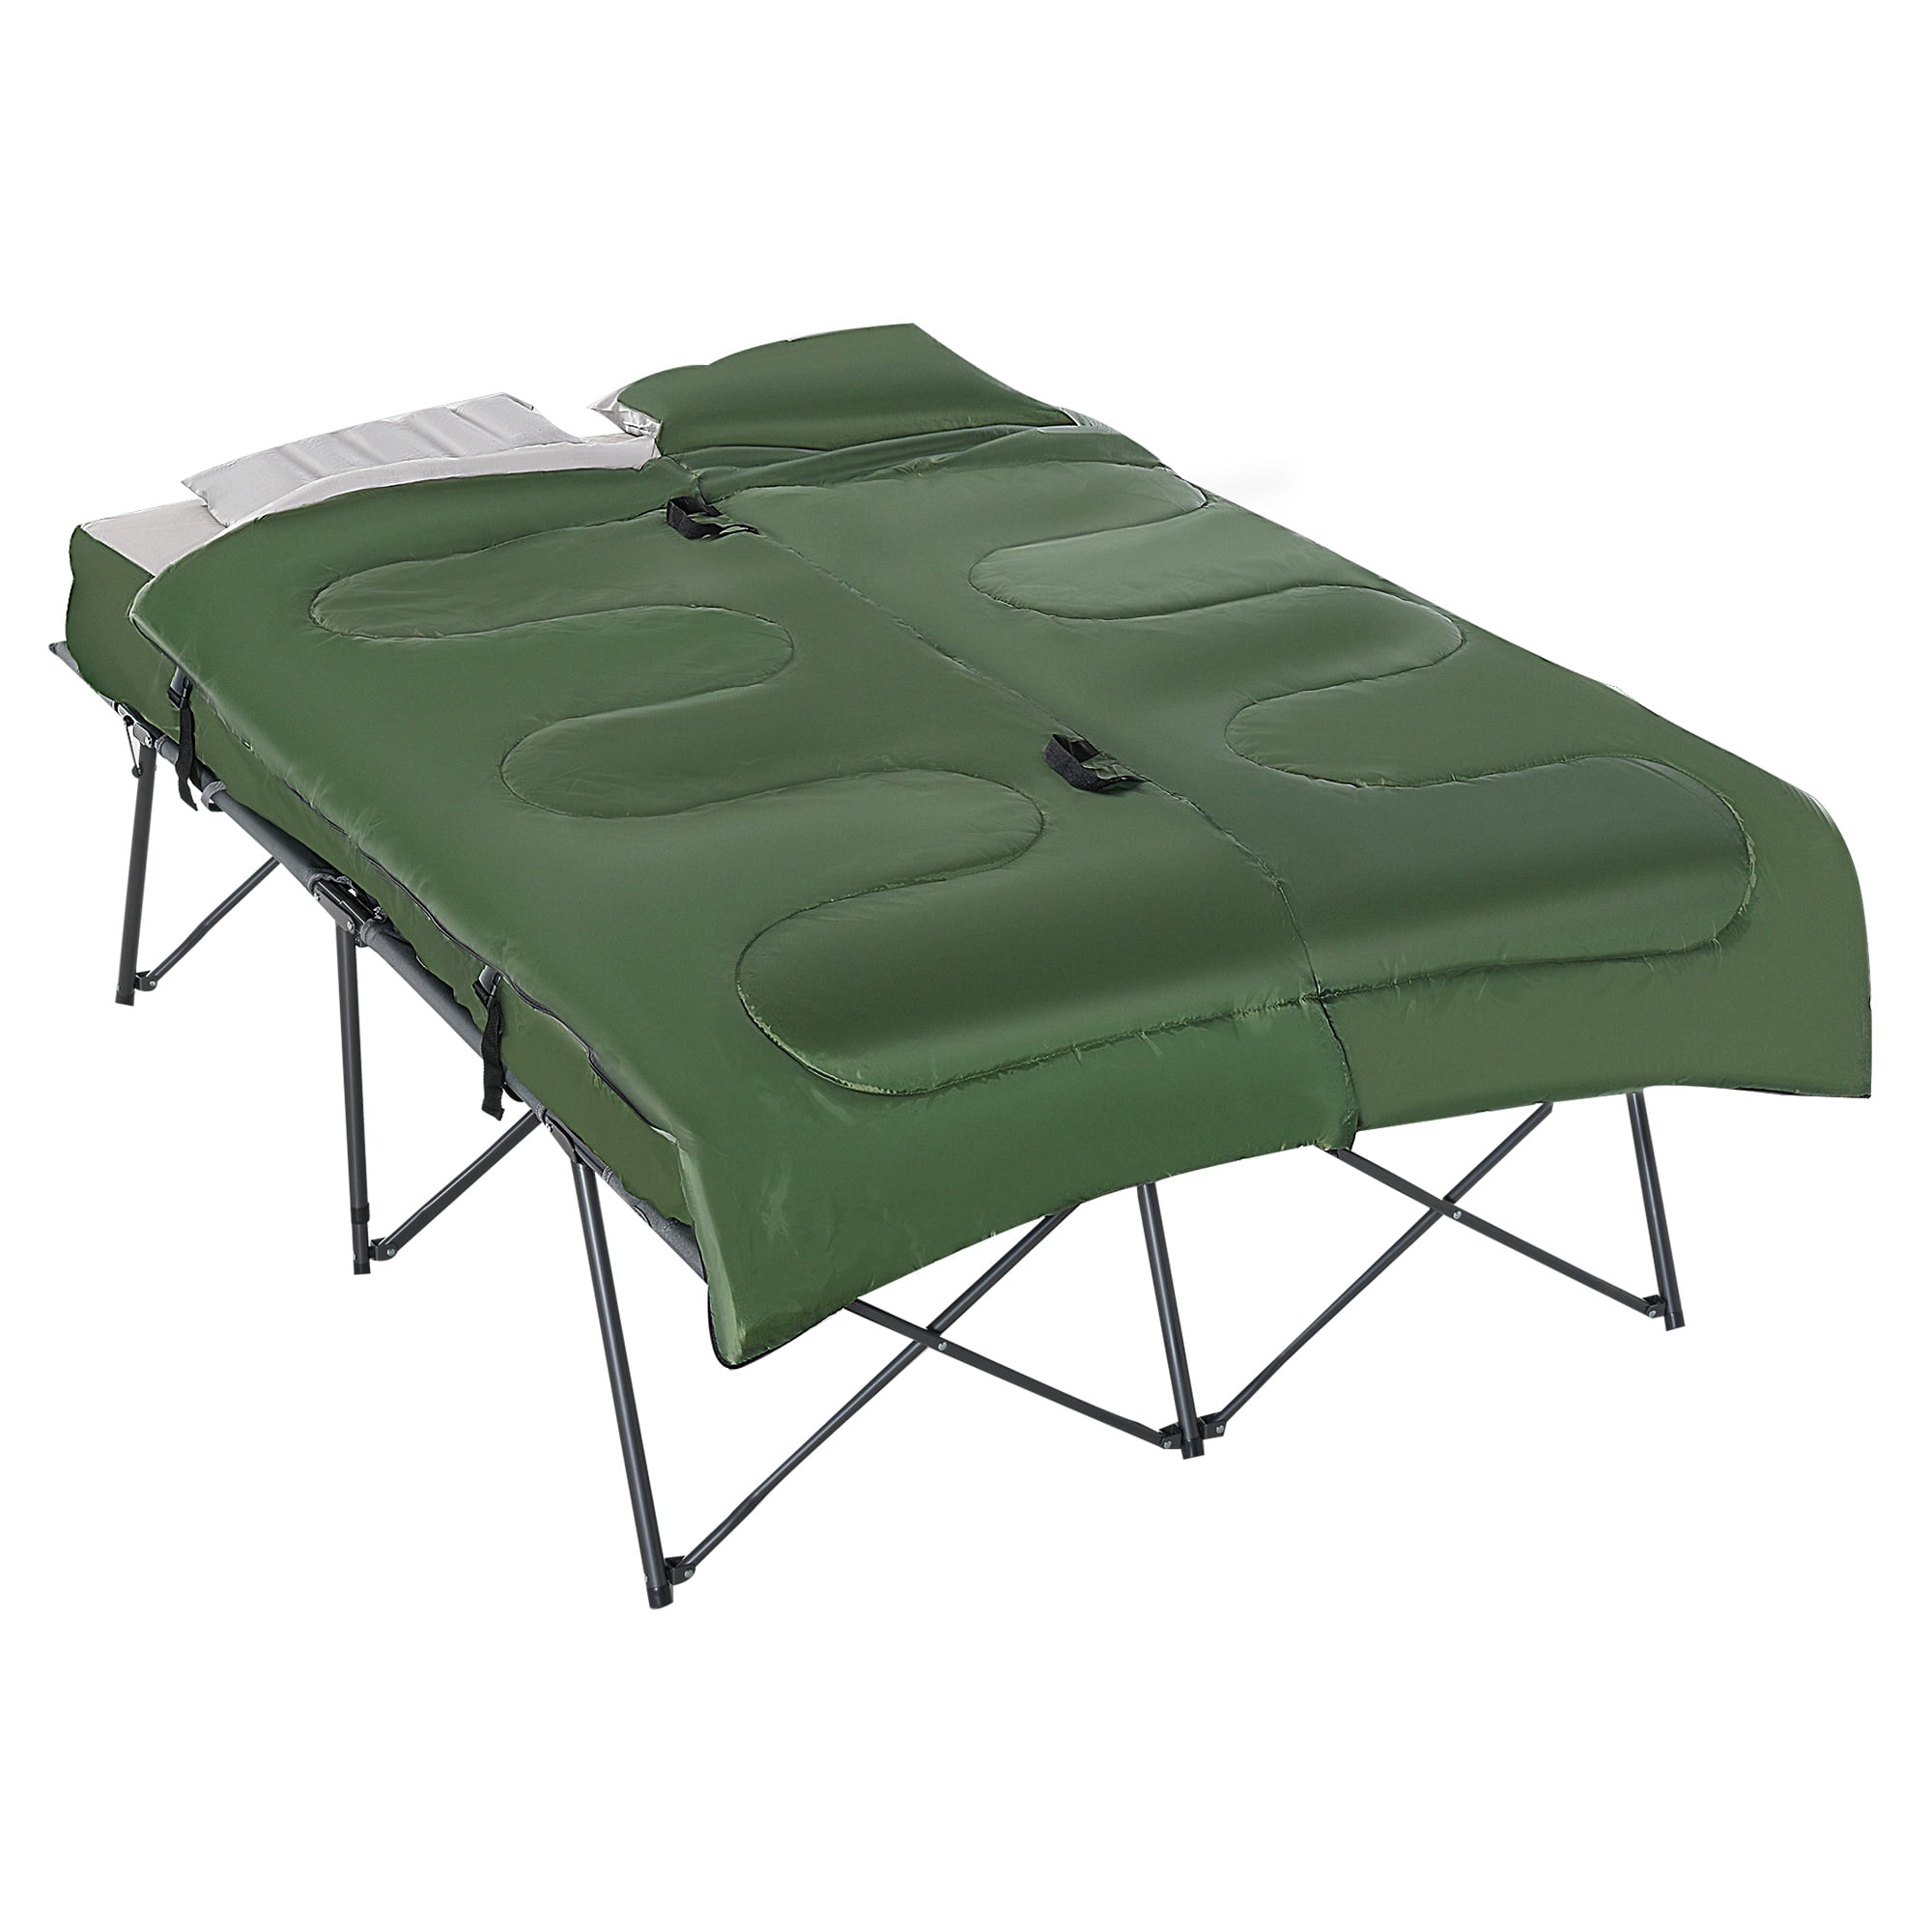 Portable Sleeping Cot Outdoor Folding Hiking Camping Travel Bed w/Soft Mattress 